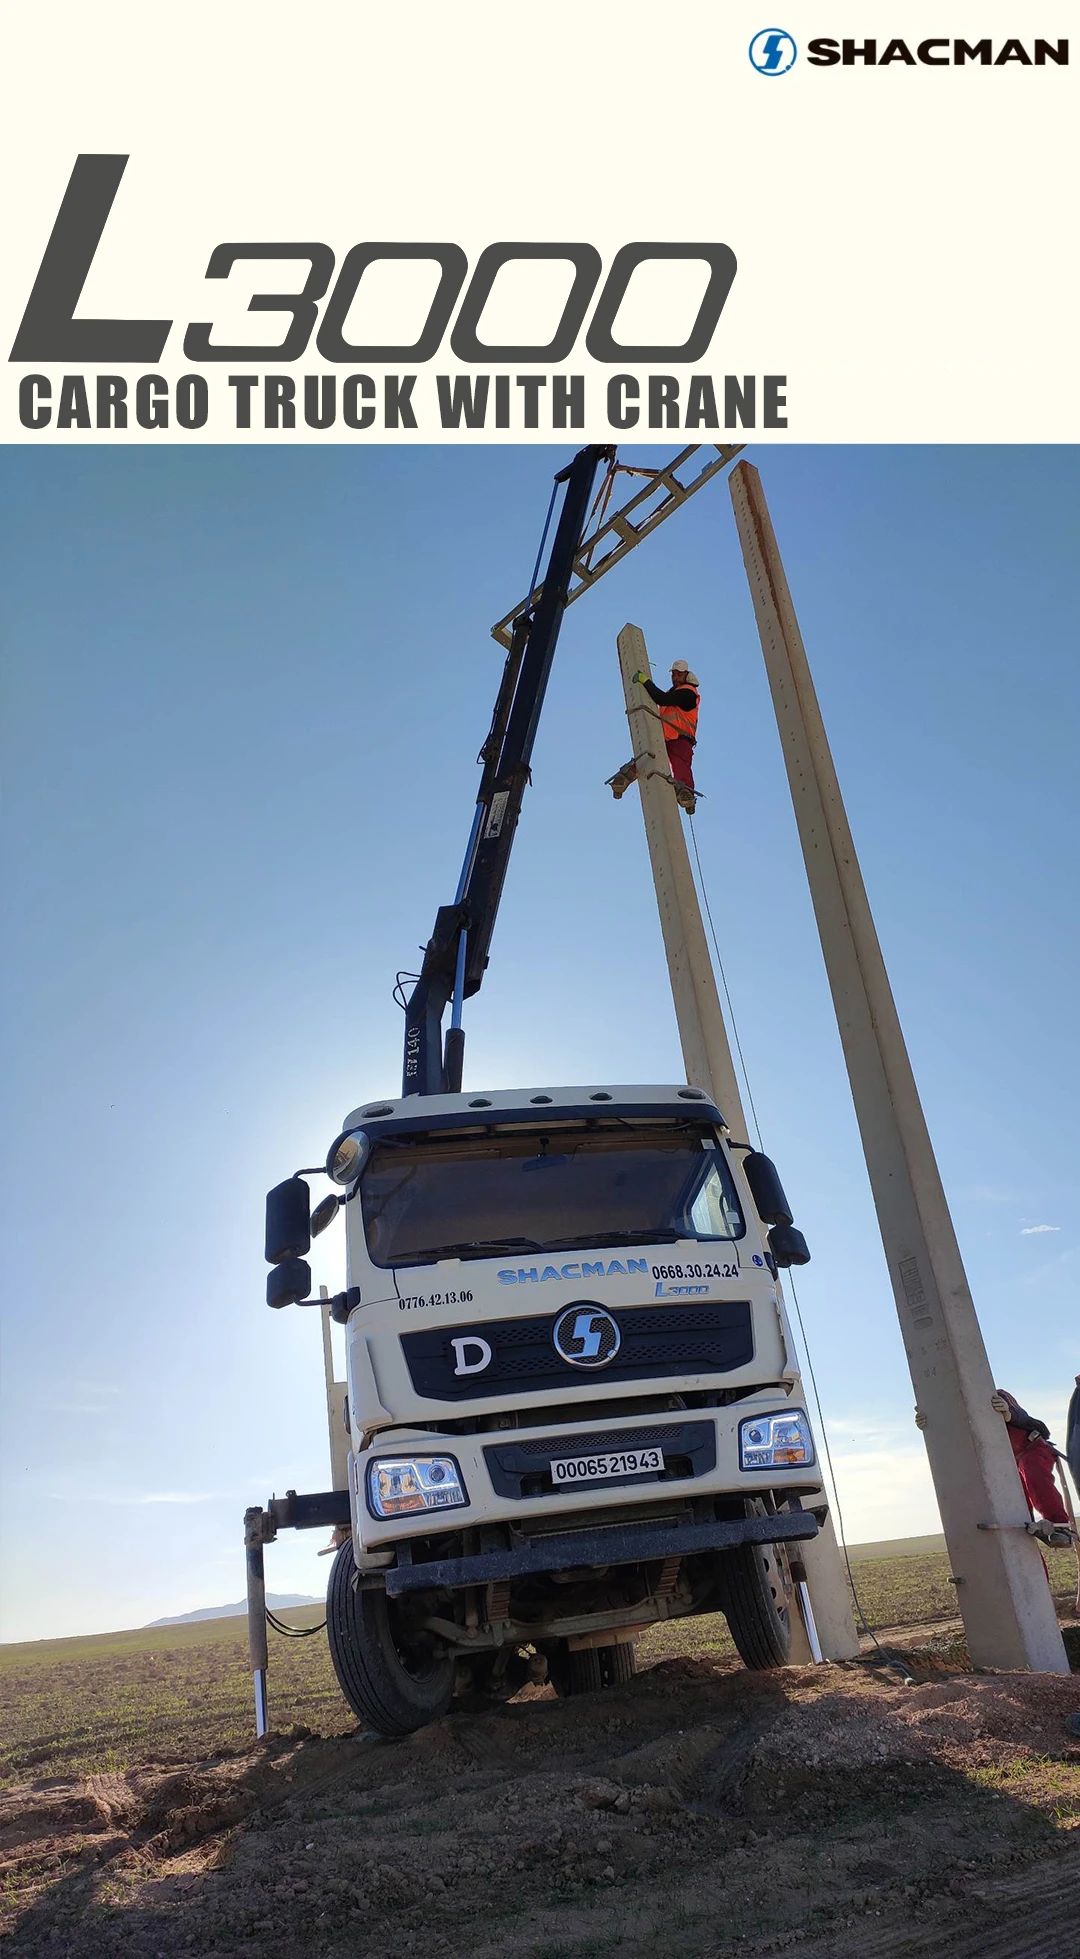 SHACMAN L3000 Cargo Truck with Crane